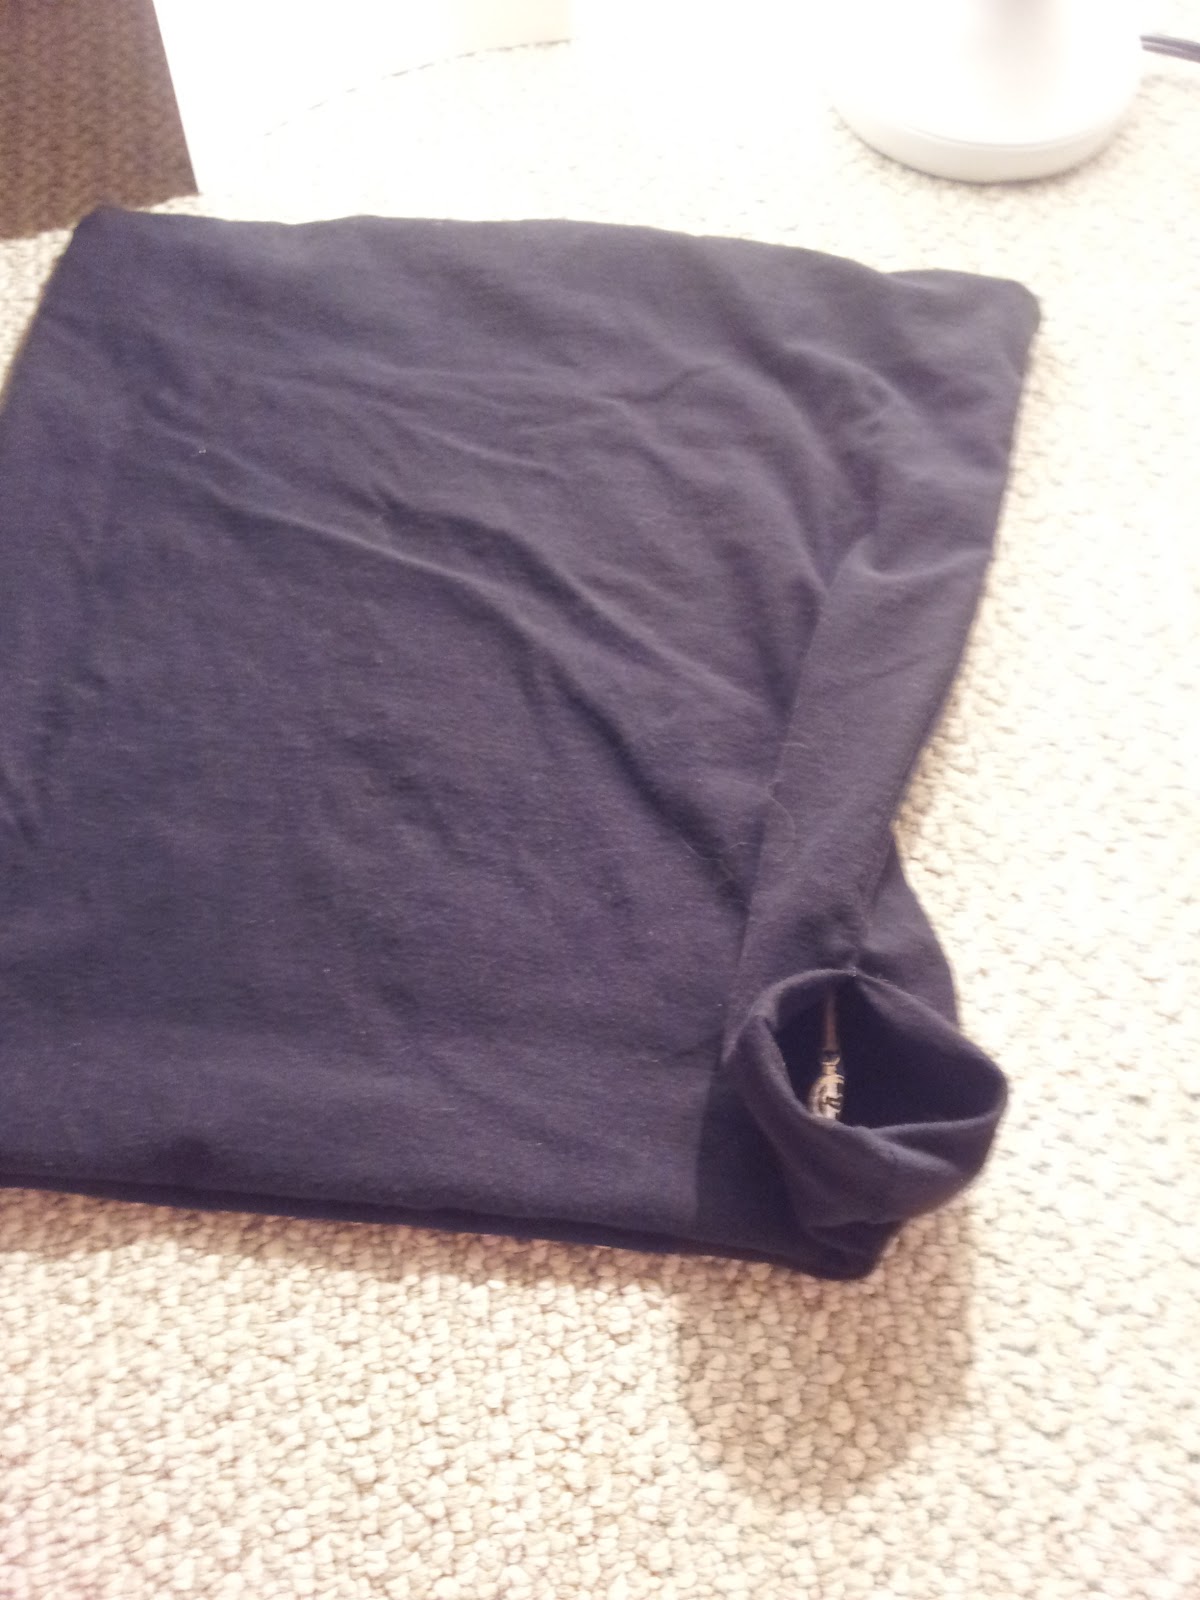 Trash Talk: How to: Make a T Shirt Pillow and a Ruffled Pillow Cover